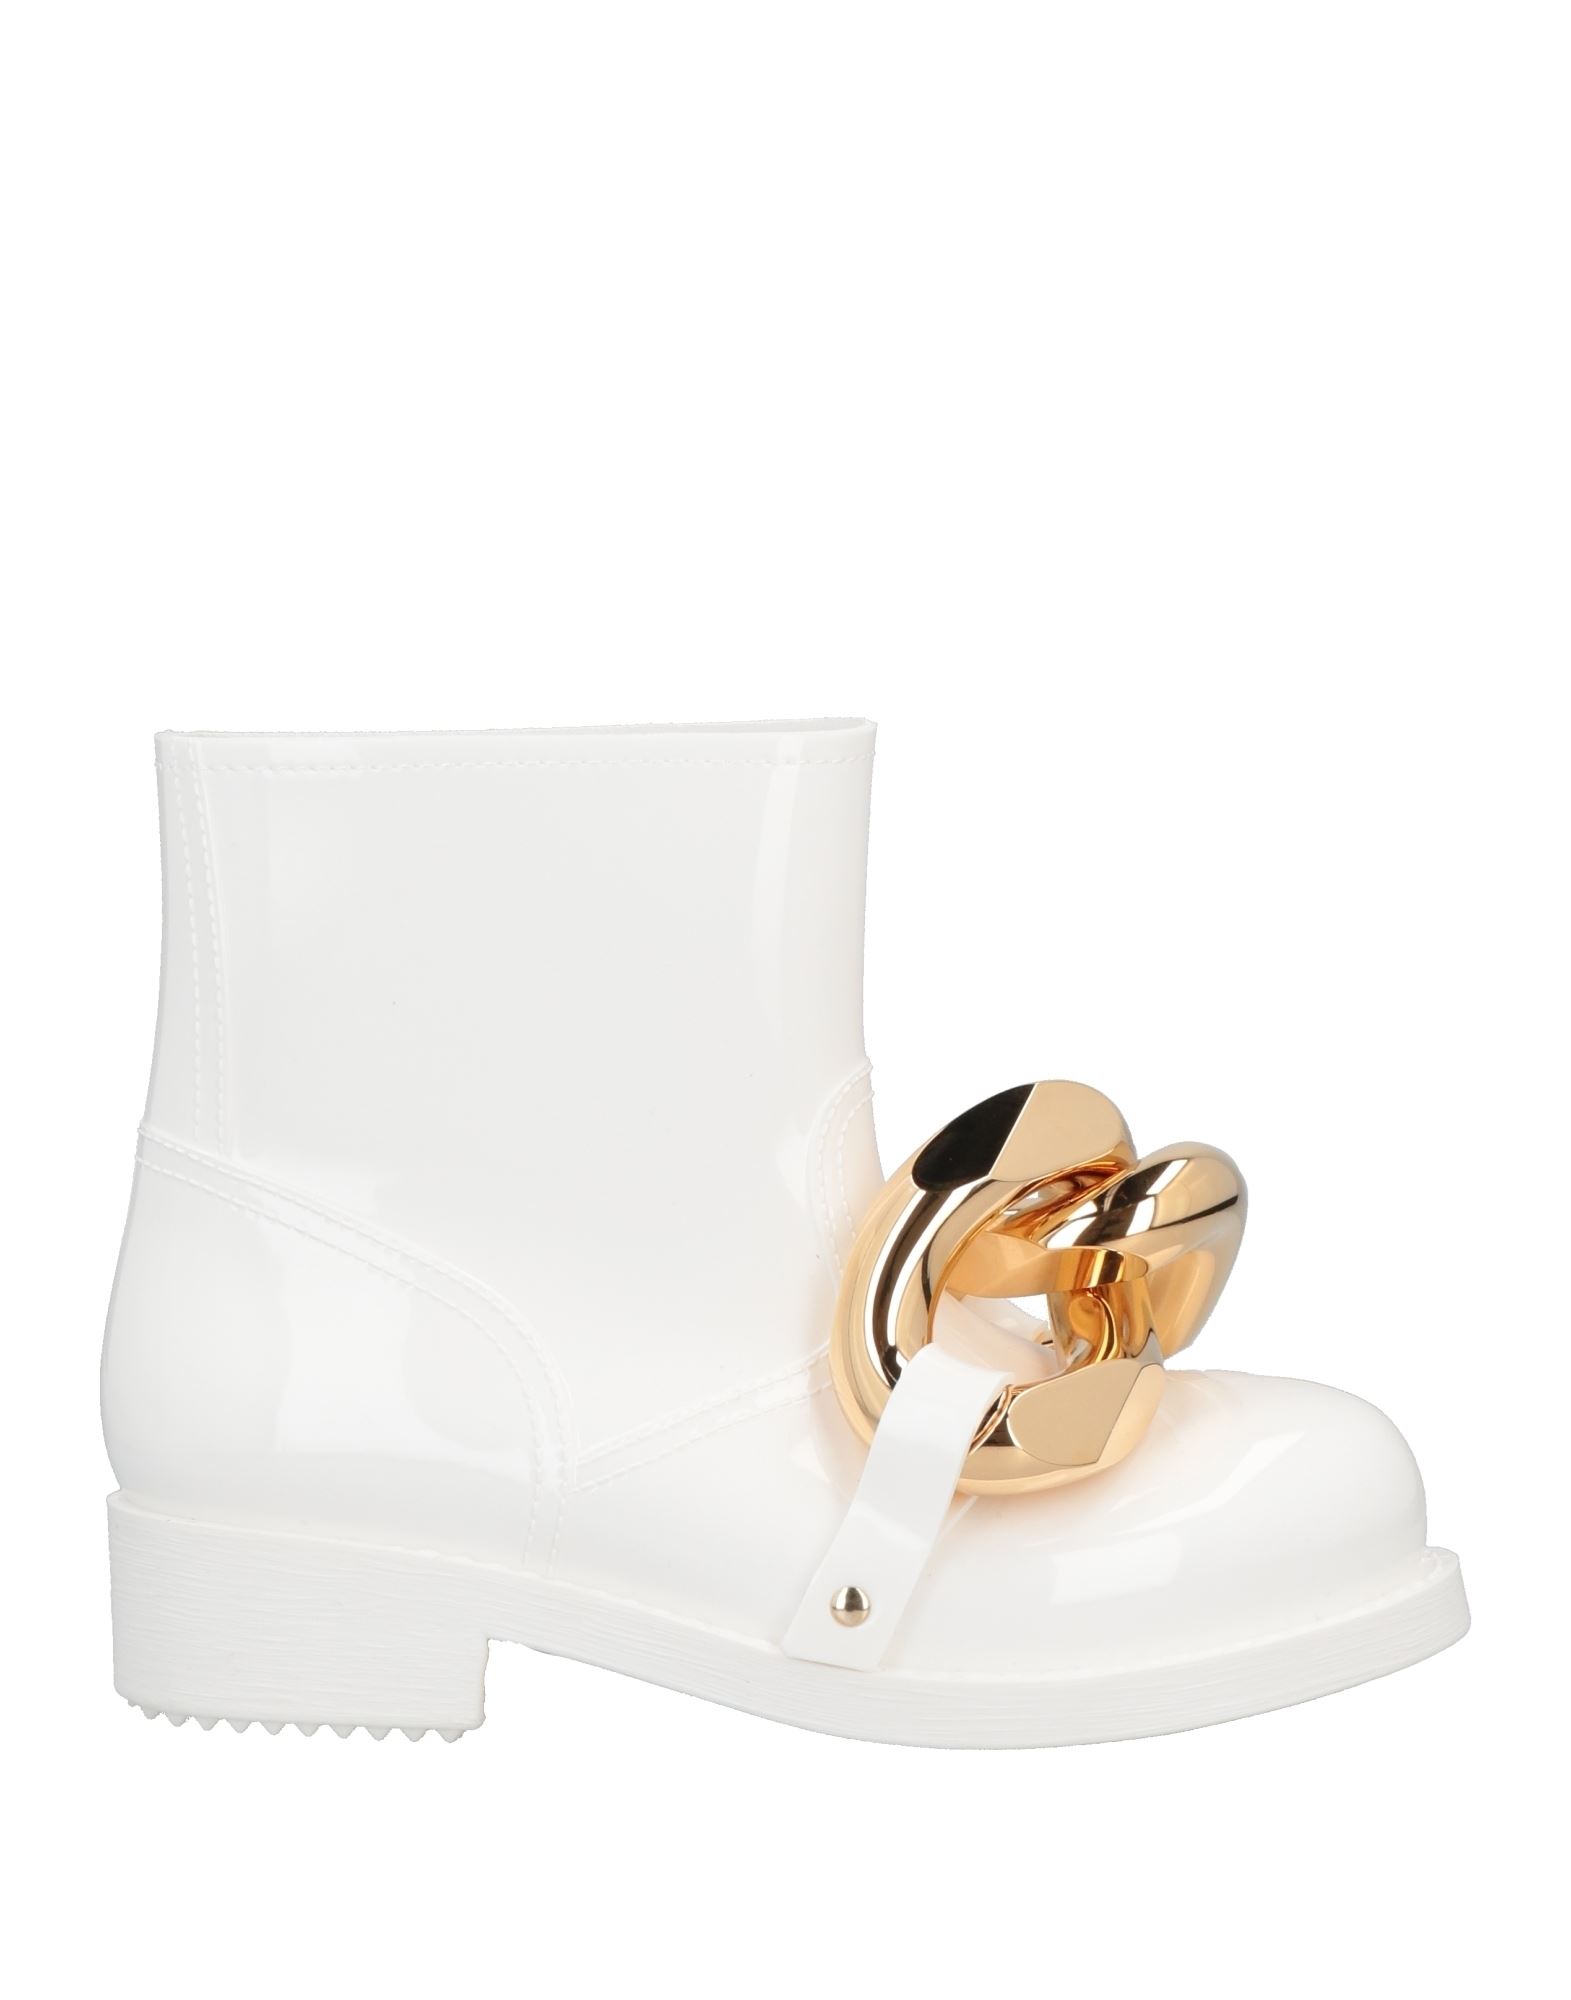 Shop Jw Anderson Woman Ankle Boots White Size 8 Rubber